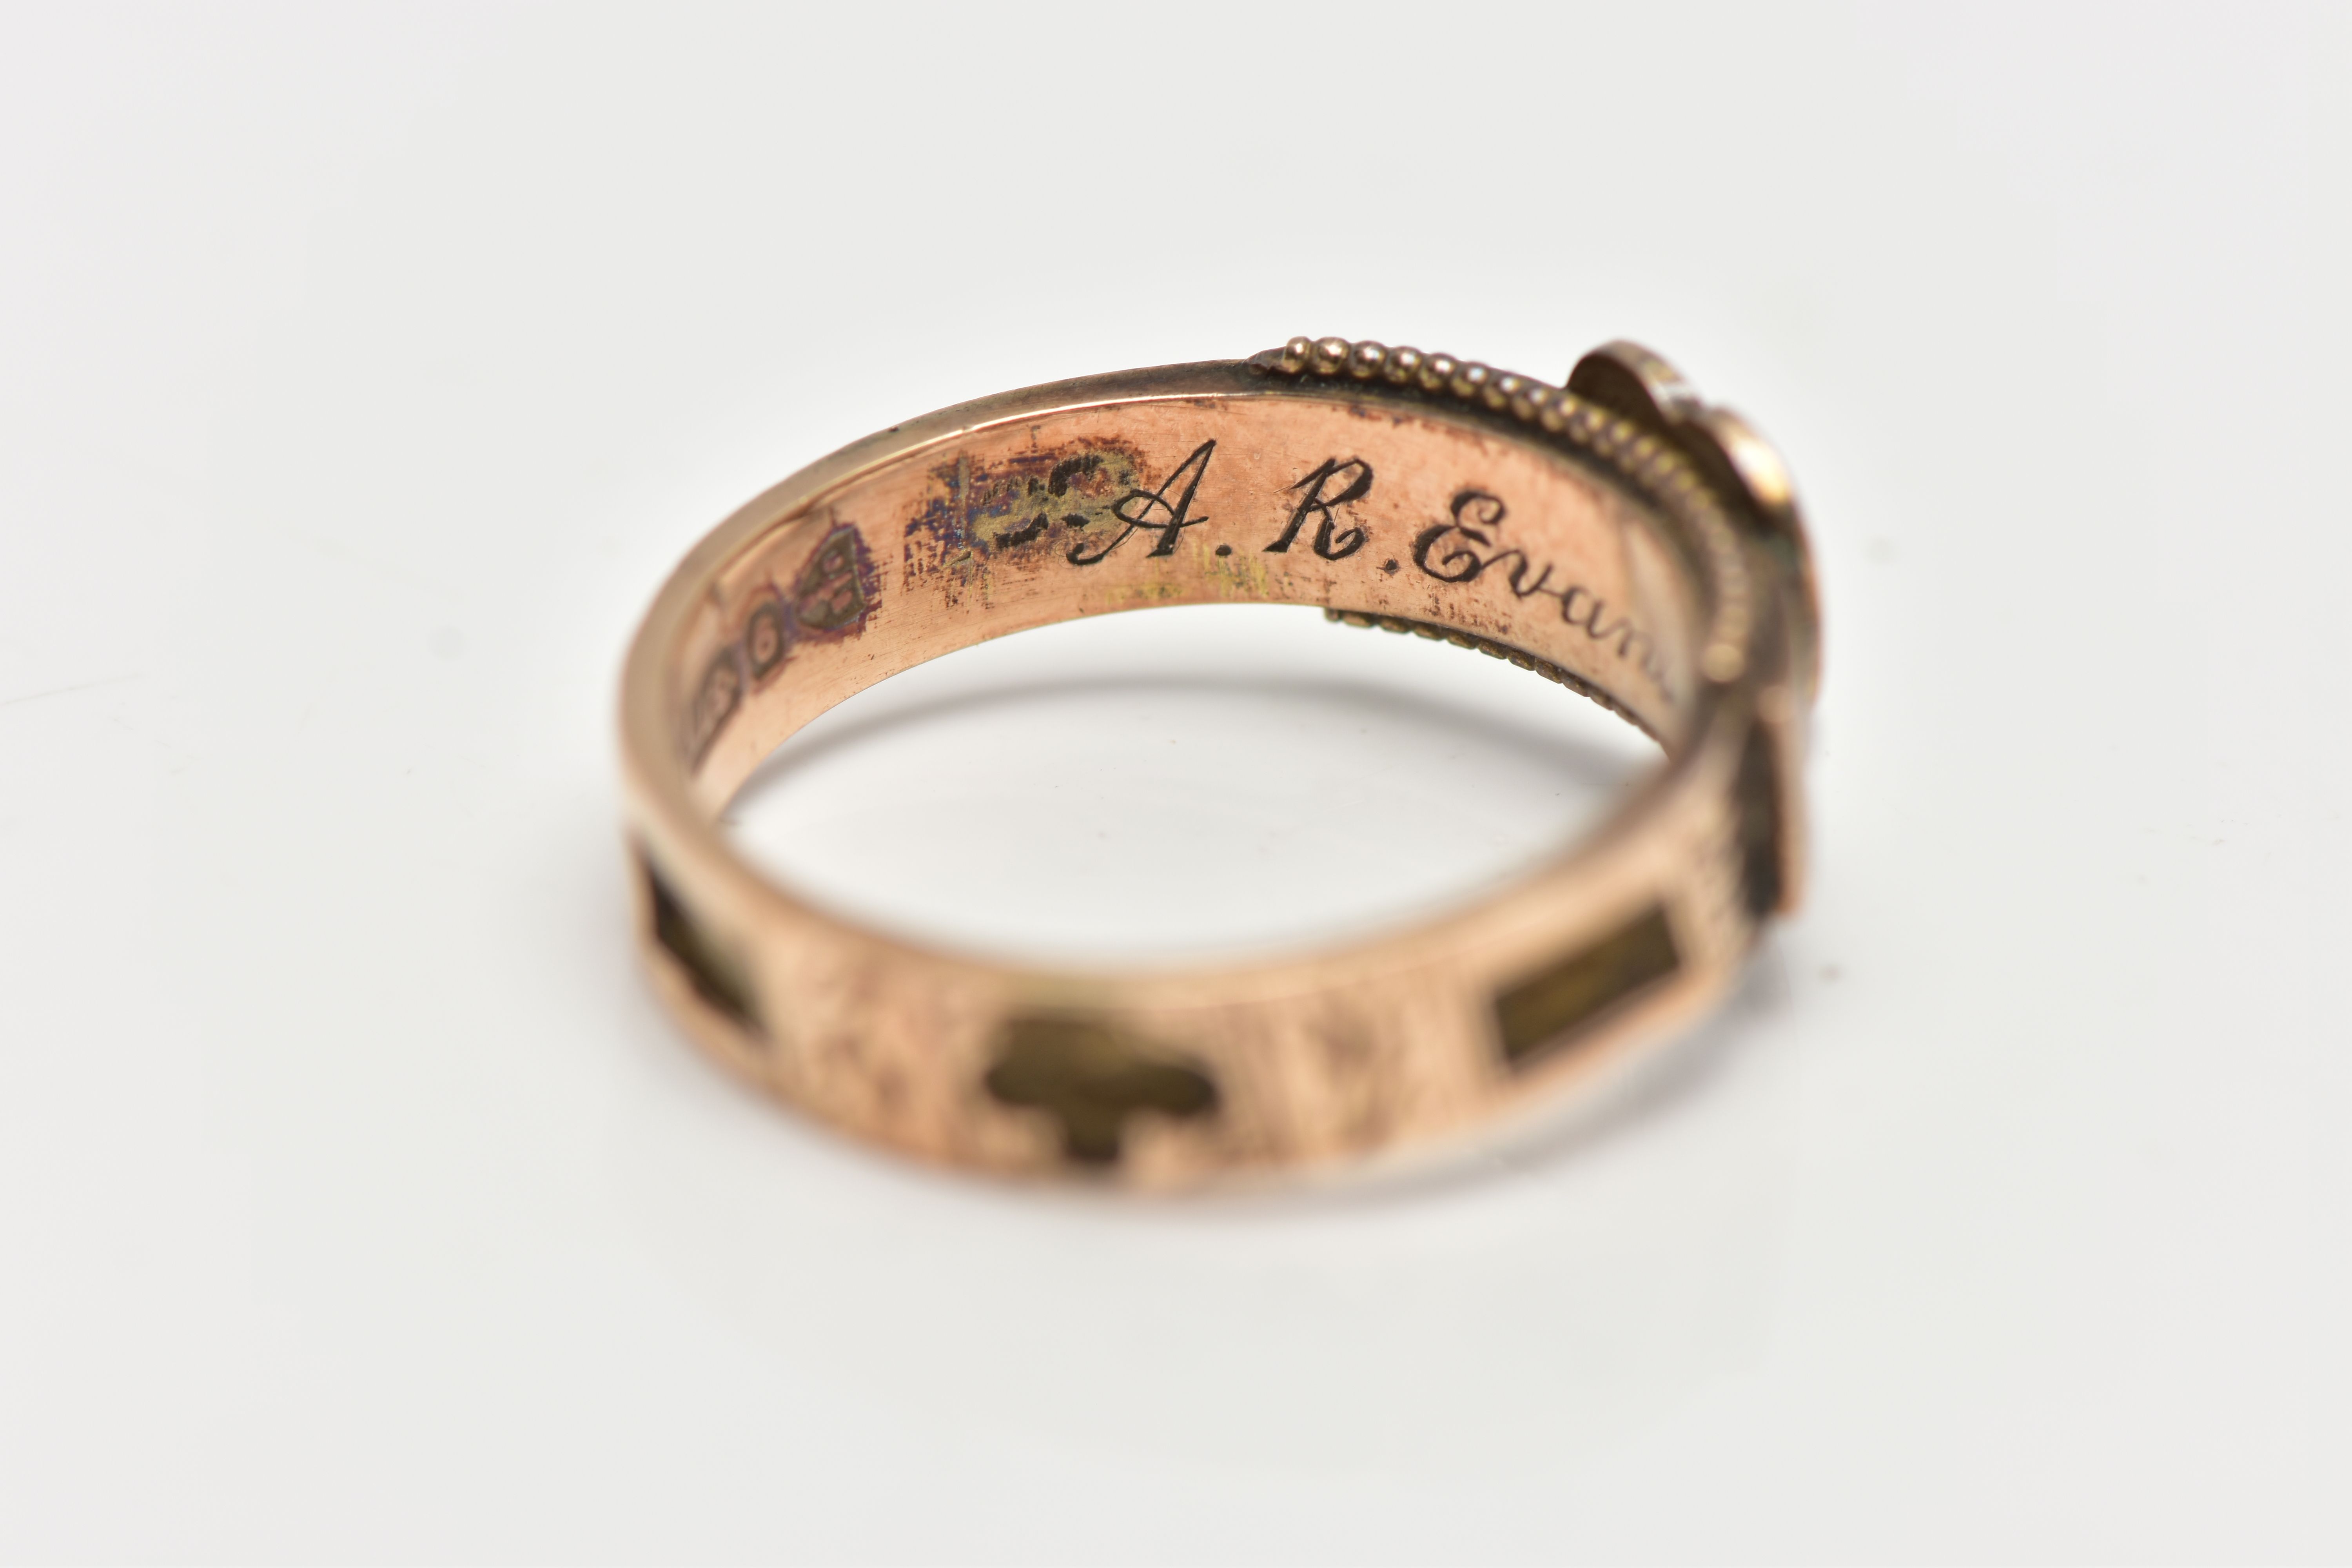 A CASED LATE VICTORIAN 9CT GOLD BLACK ENAMEL MOURNING RING, designed as a black enamel heart with - Image 7 of 9